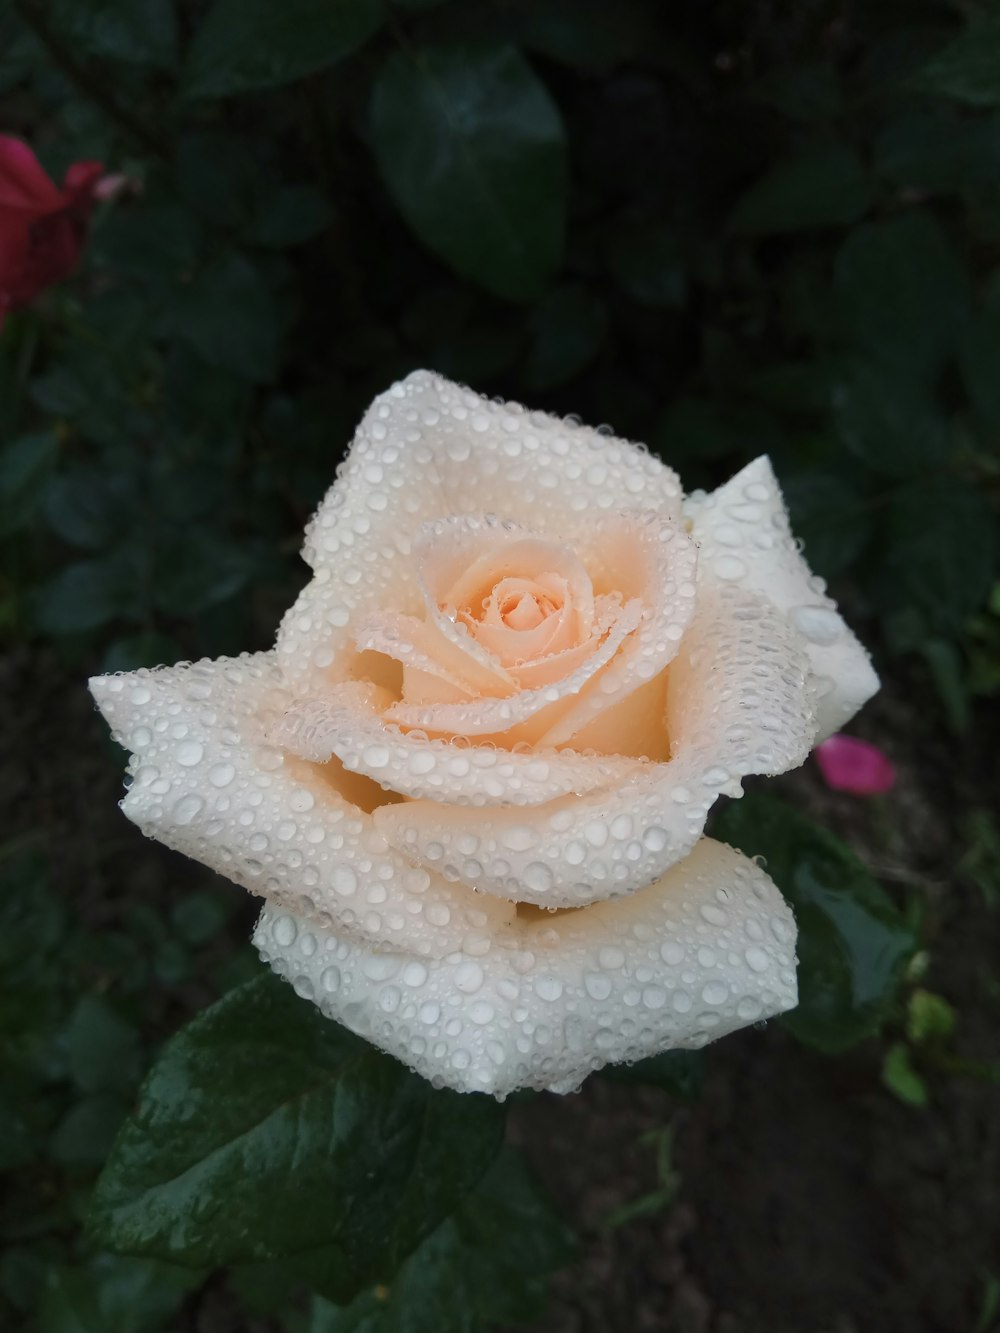 a white rose with a yellow center